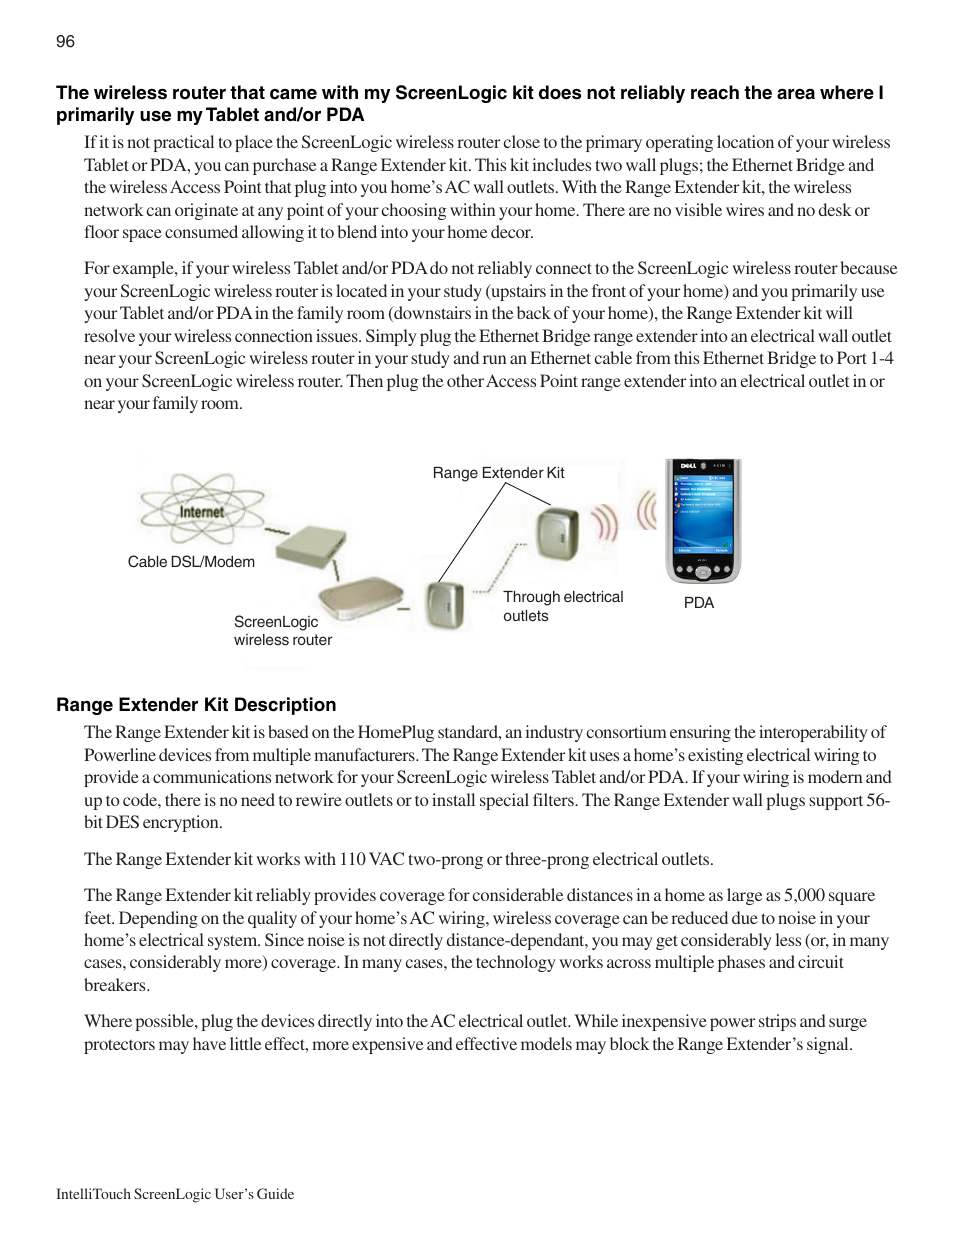 Pentair Intellitouch ScreenLogic User Manual | Page 106 / 116